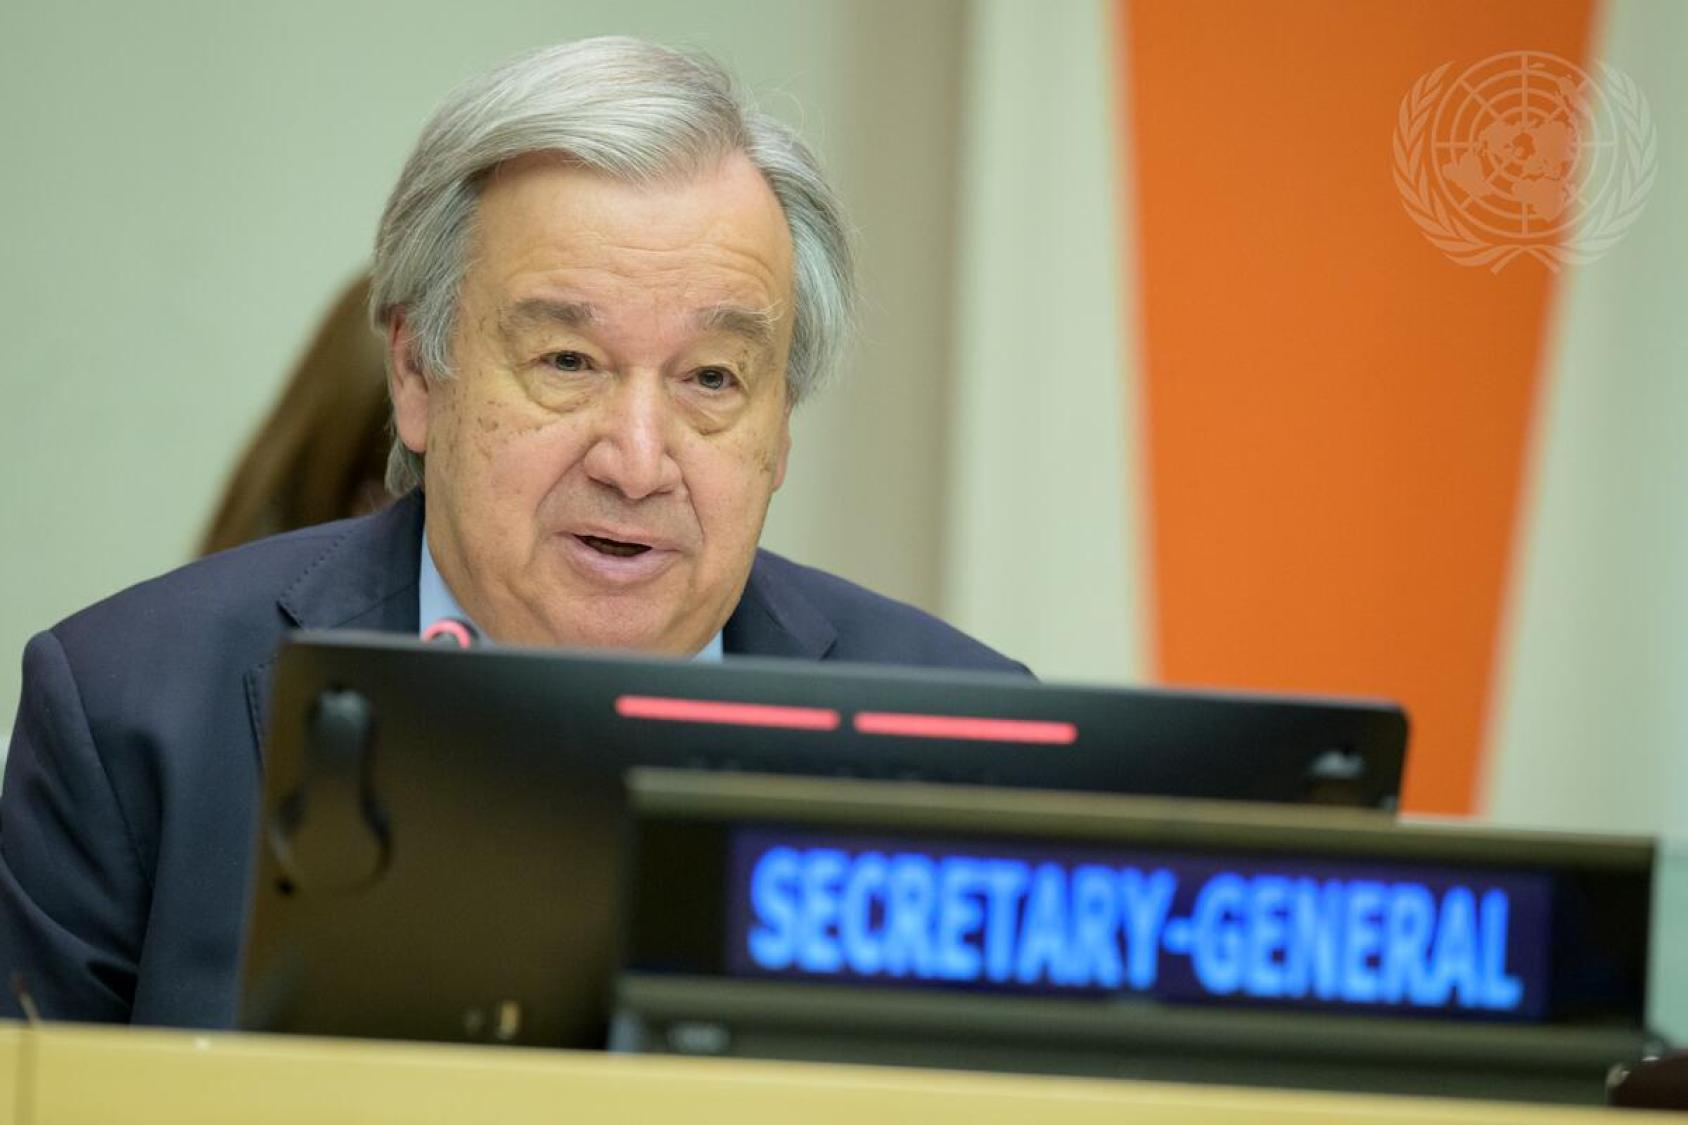 The UN secretary general sits at a podium and speaks into a microphone